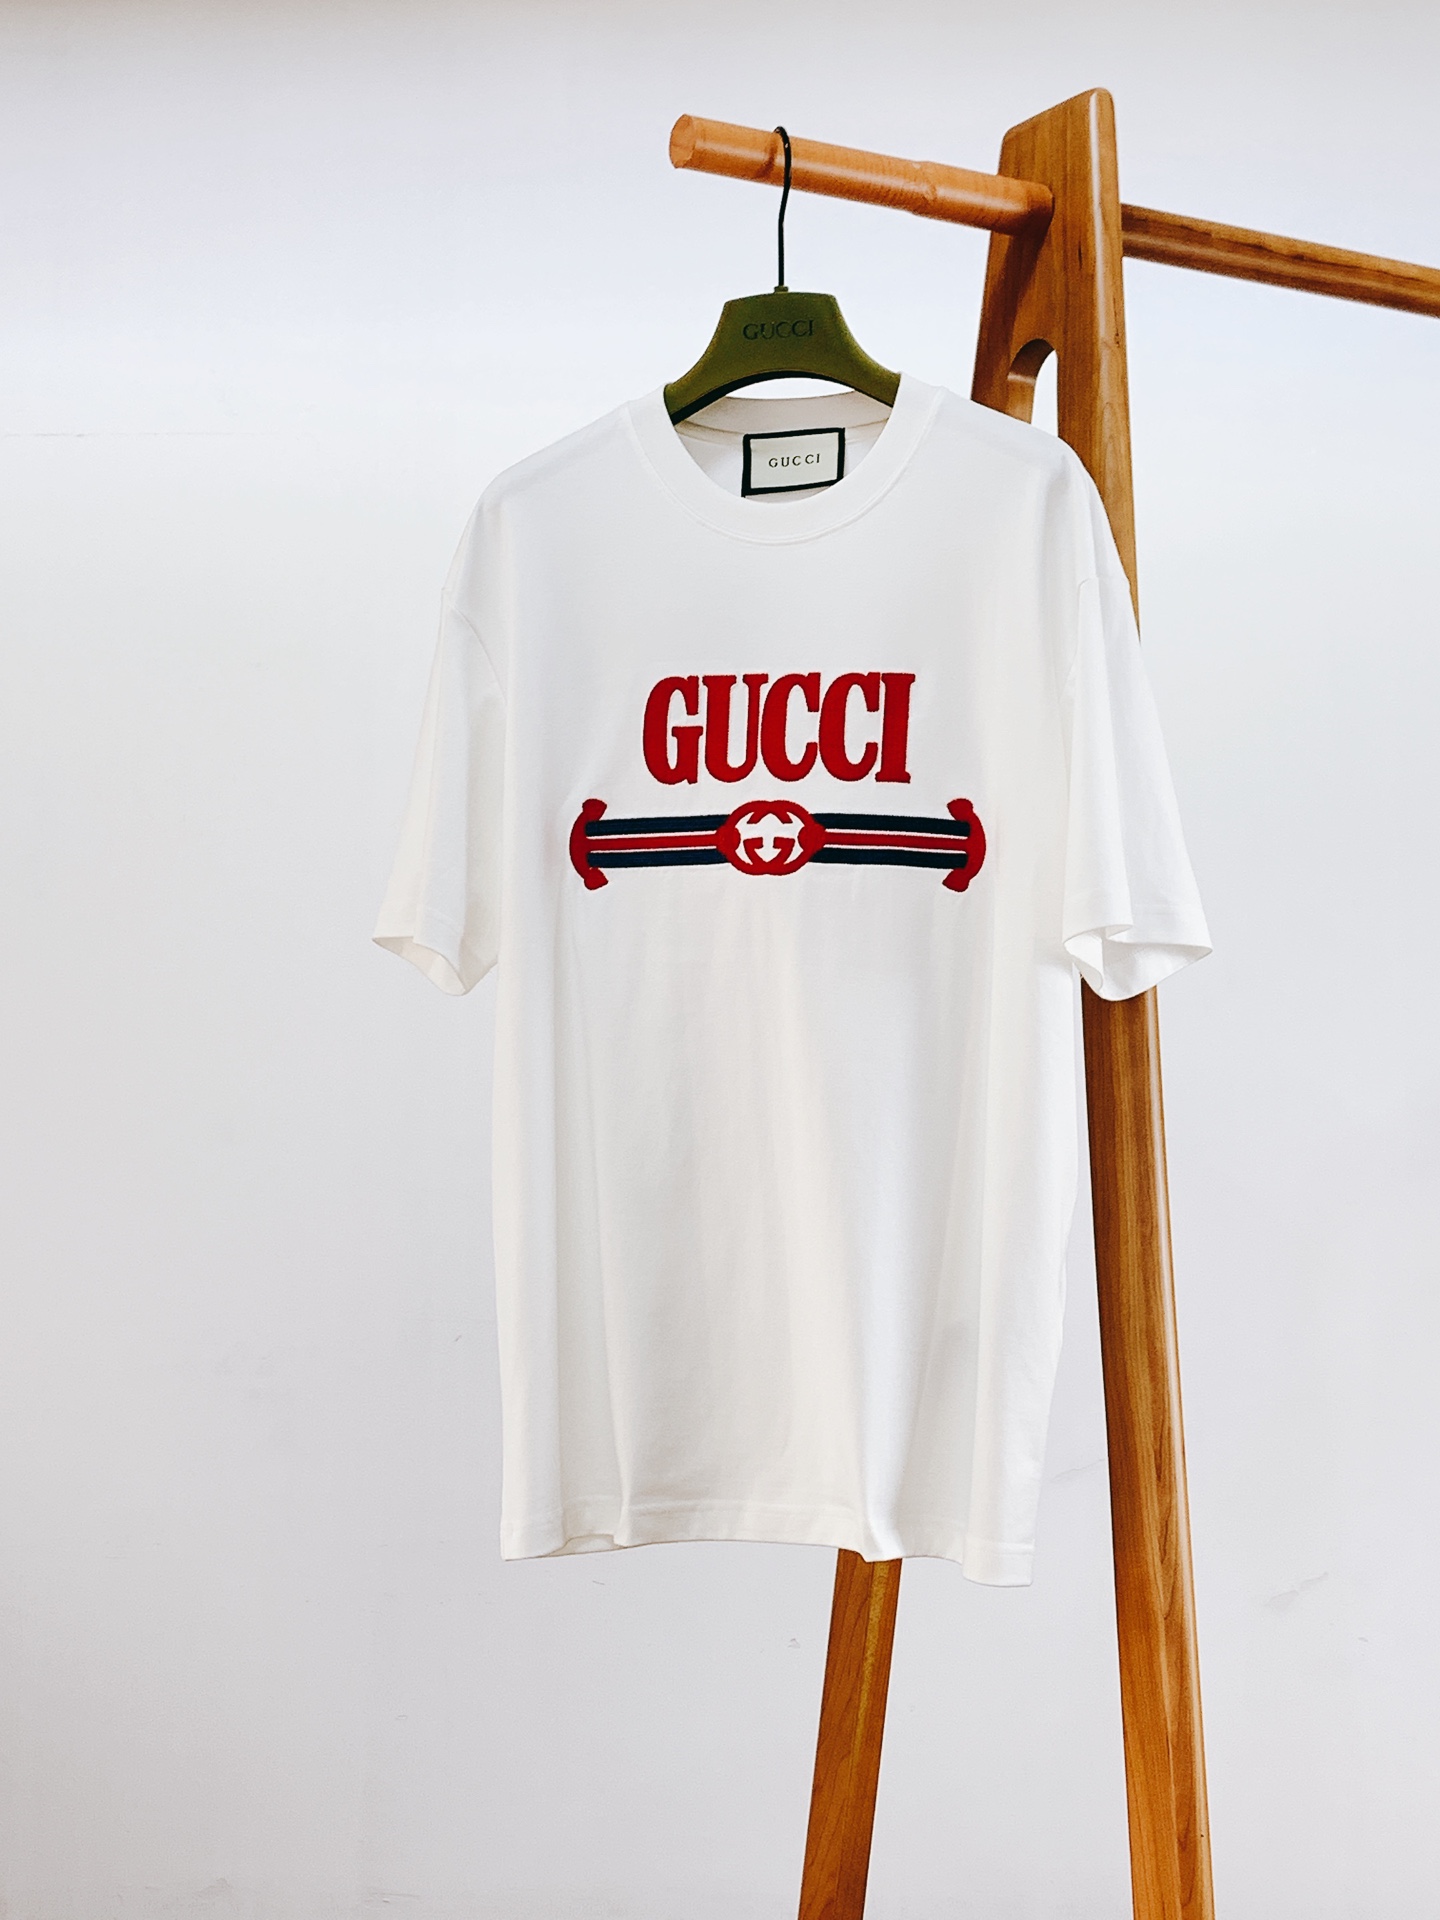 Gucci Clothing T-Shirt Embroidery Unisex Spring/Summer Collection Short Sleeve